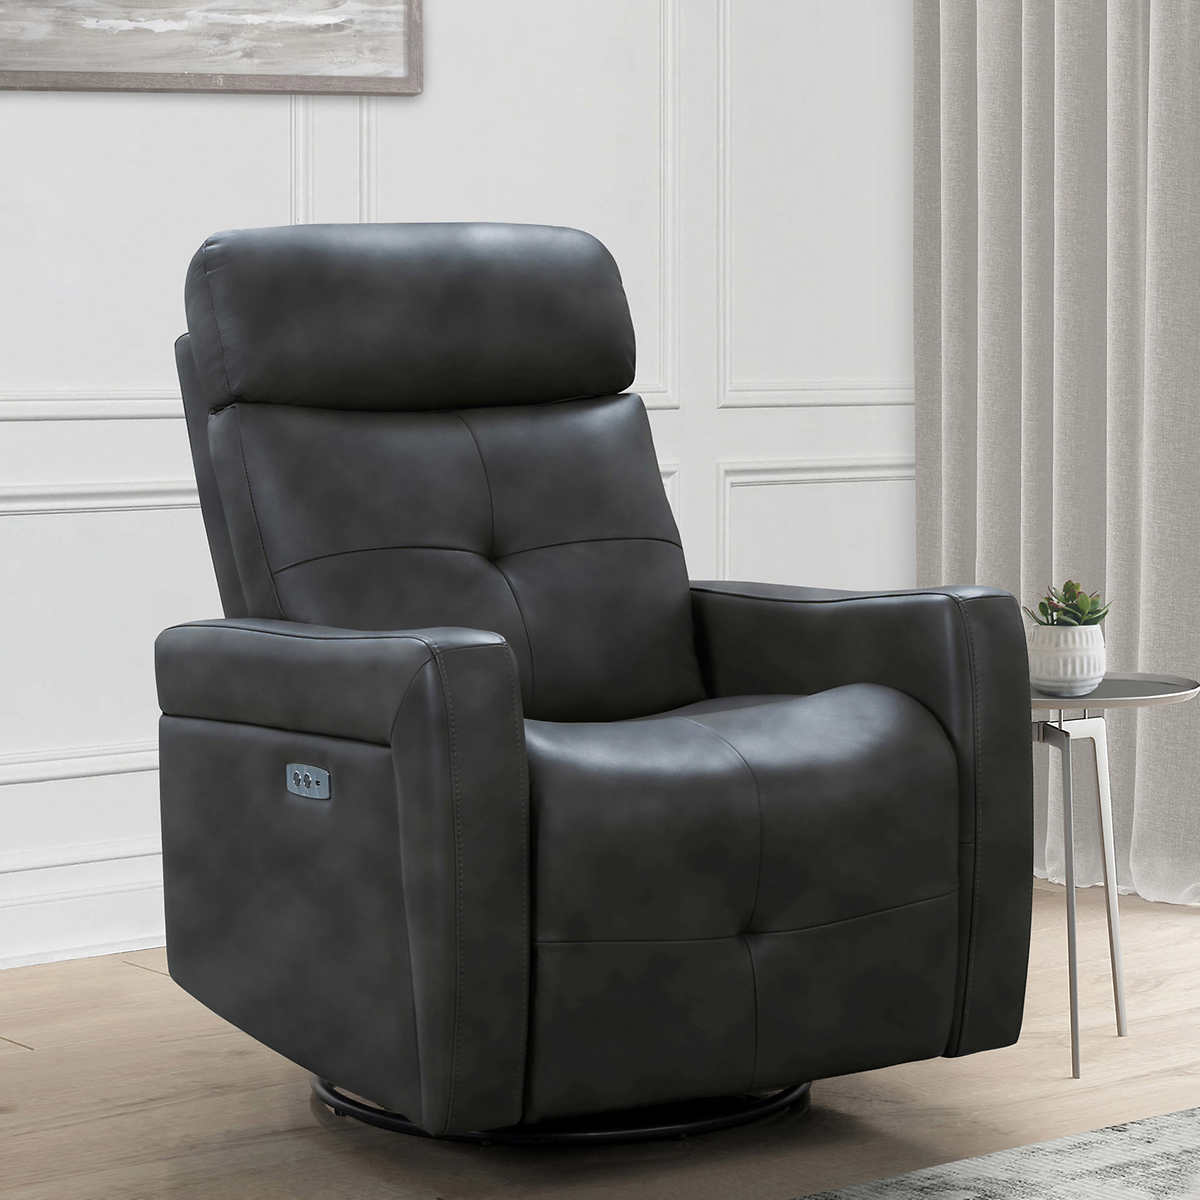 Rochester Leather Power Swivel Glider, Real Leather Swivel Recliner Chair